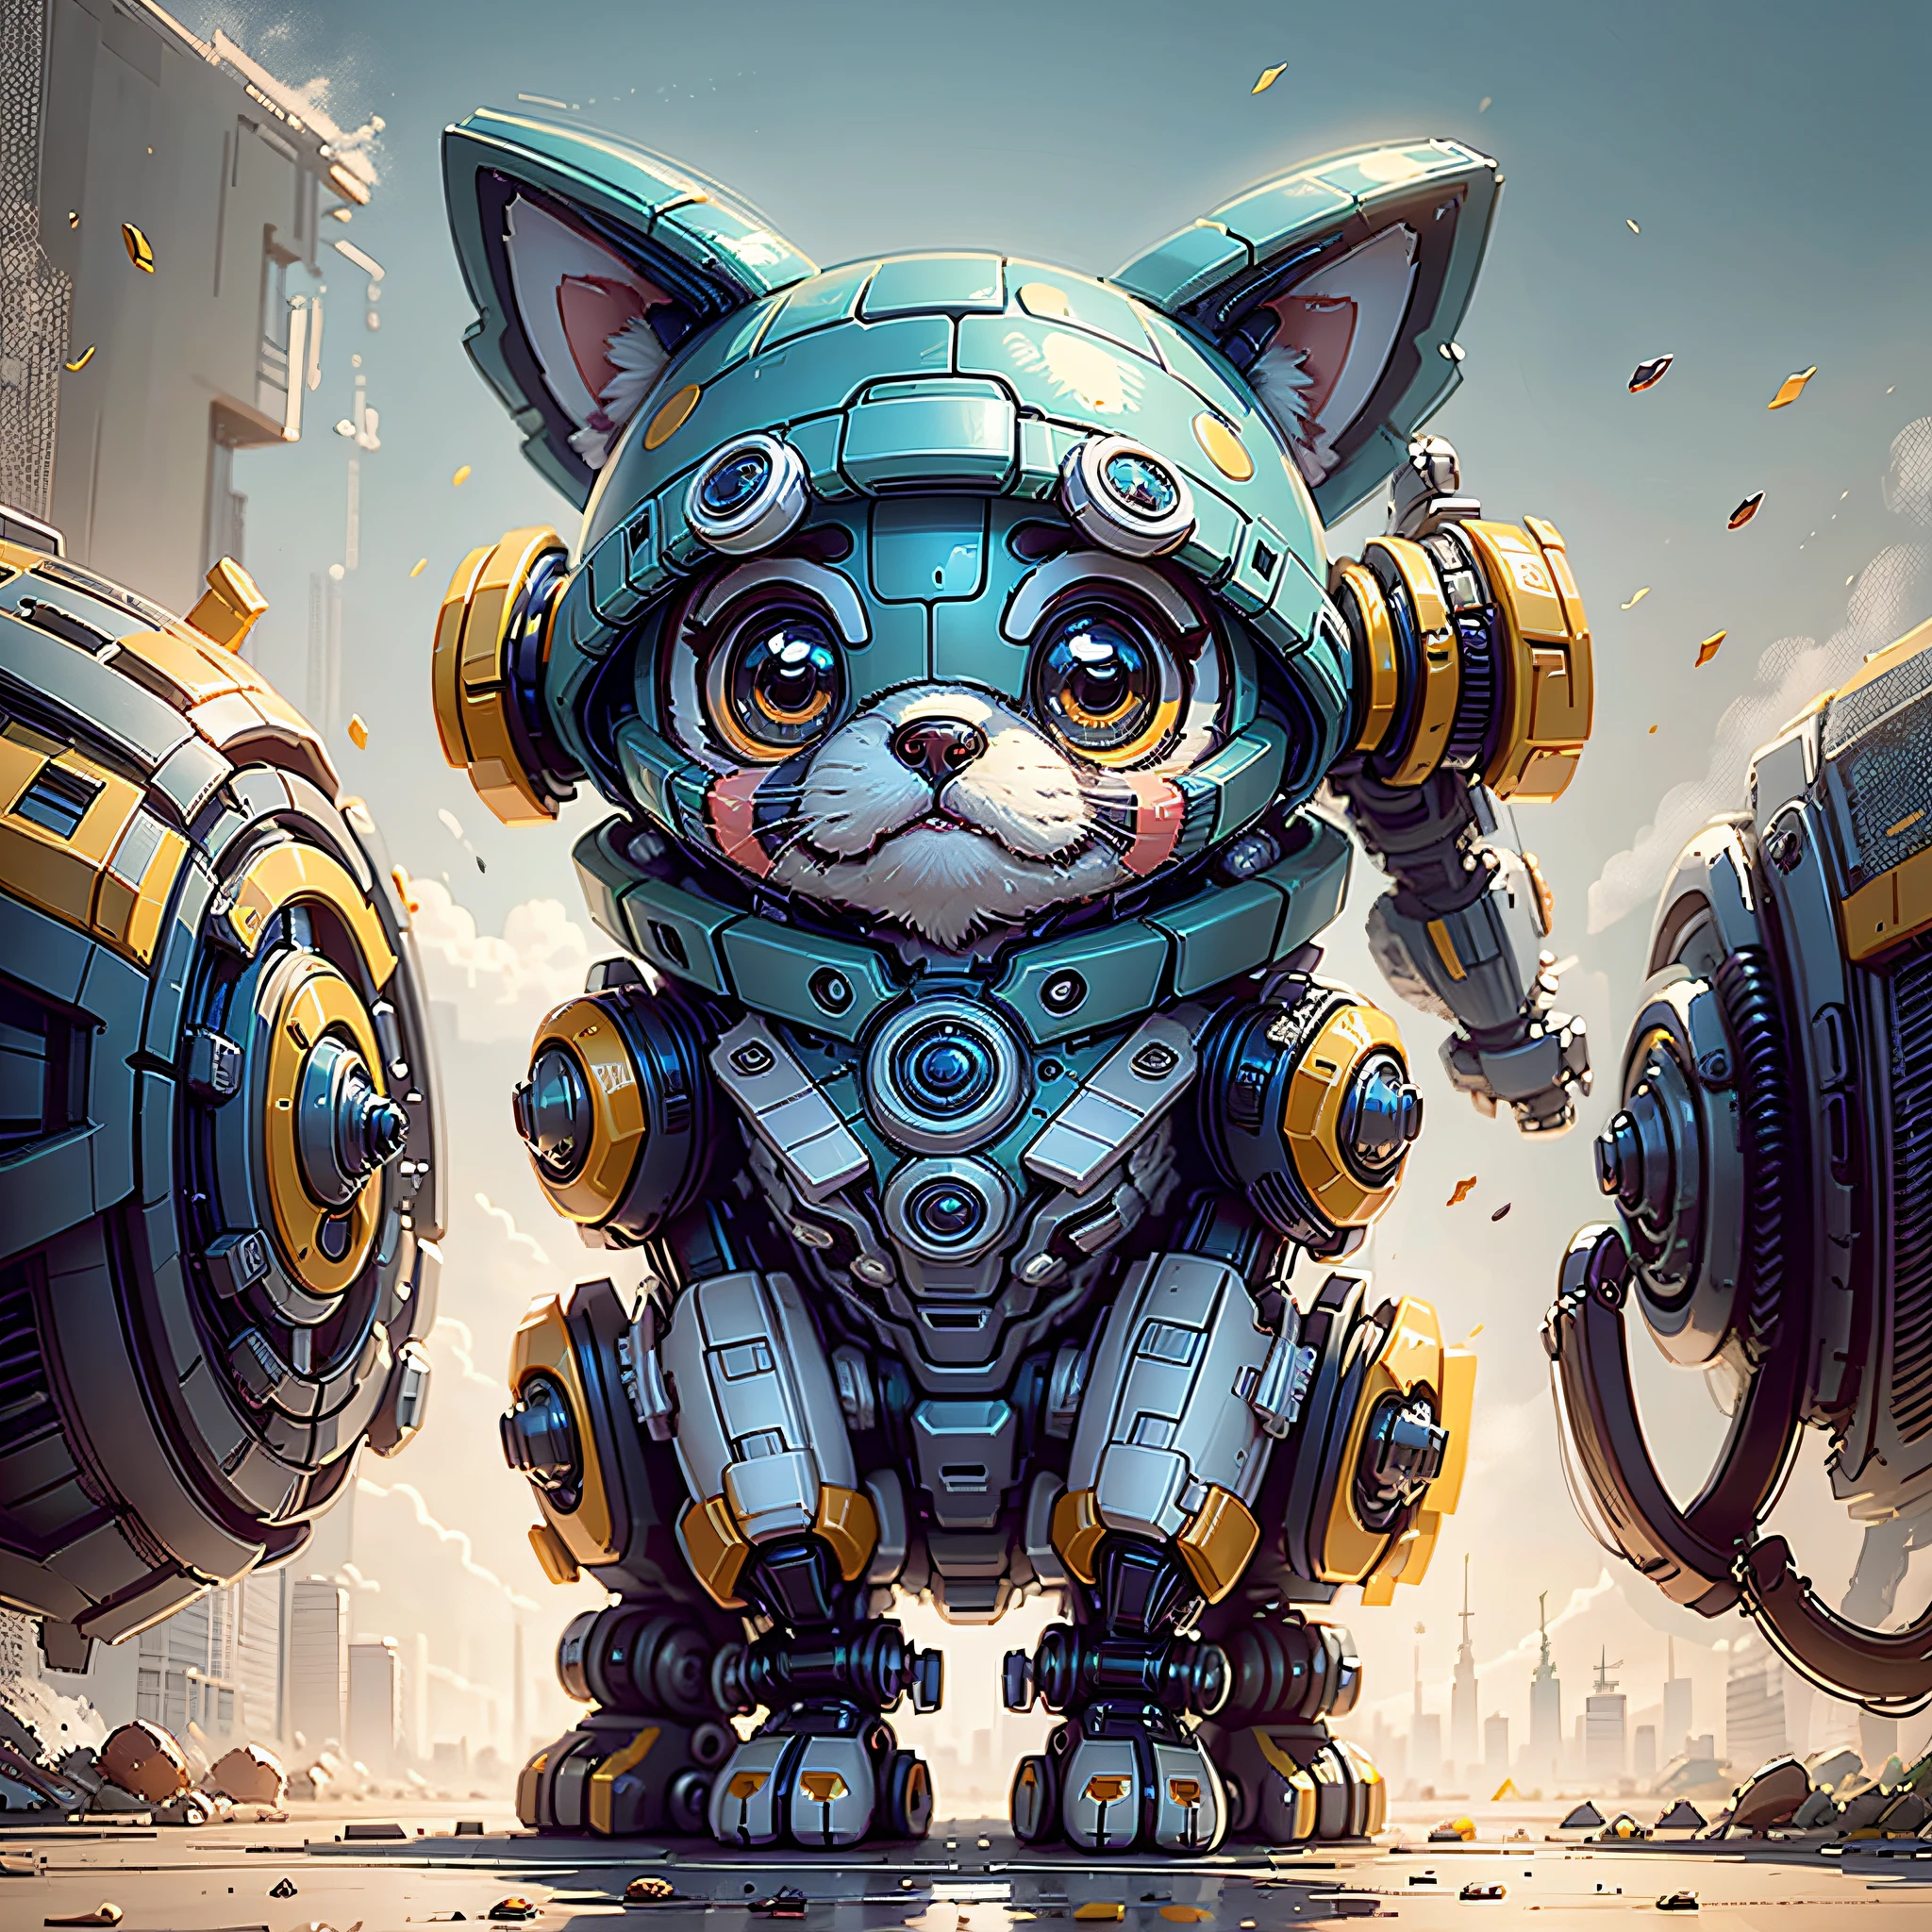 Puppy robots can have a cute design, large and expressive eyes, bright colors and rounded shapes, making it attractive cartoon style